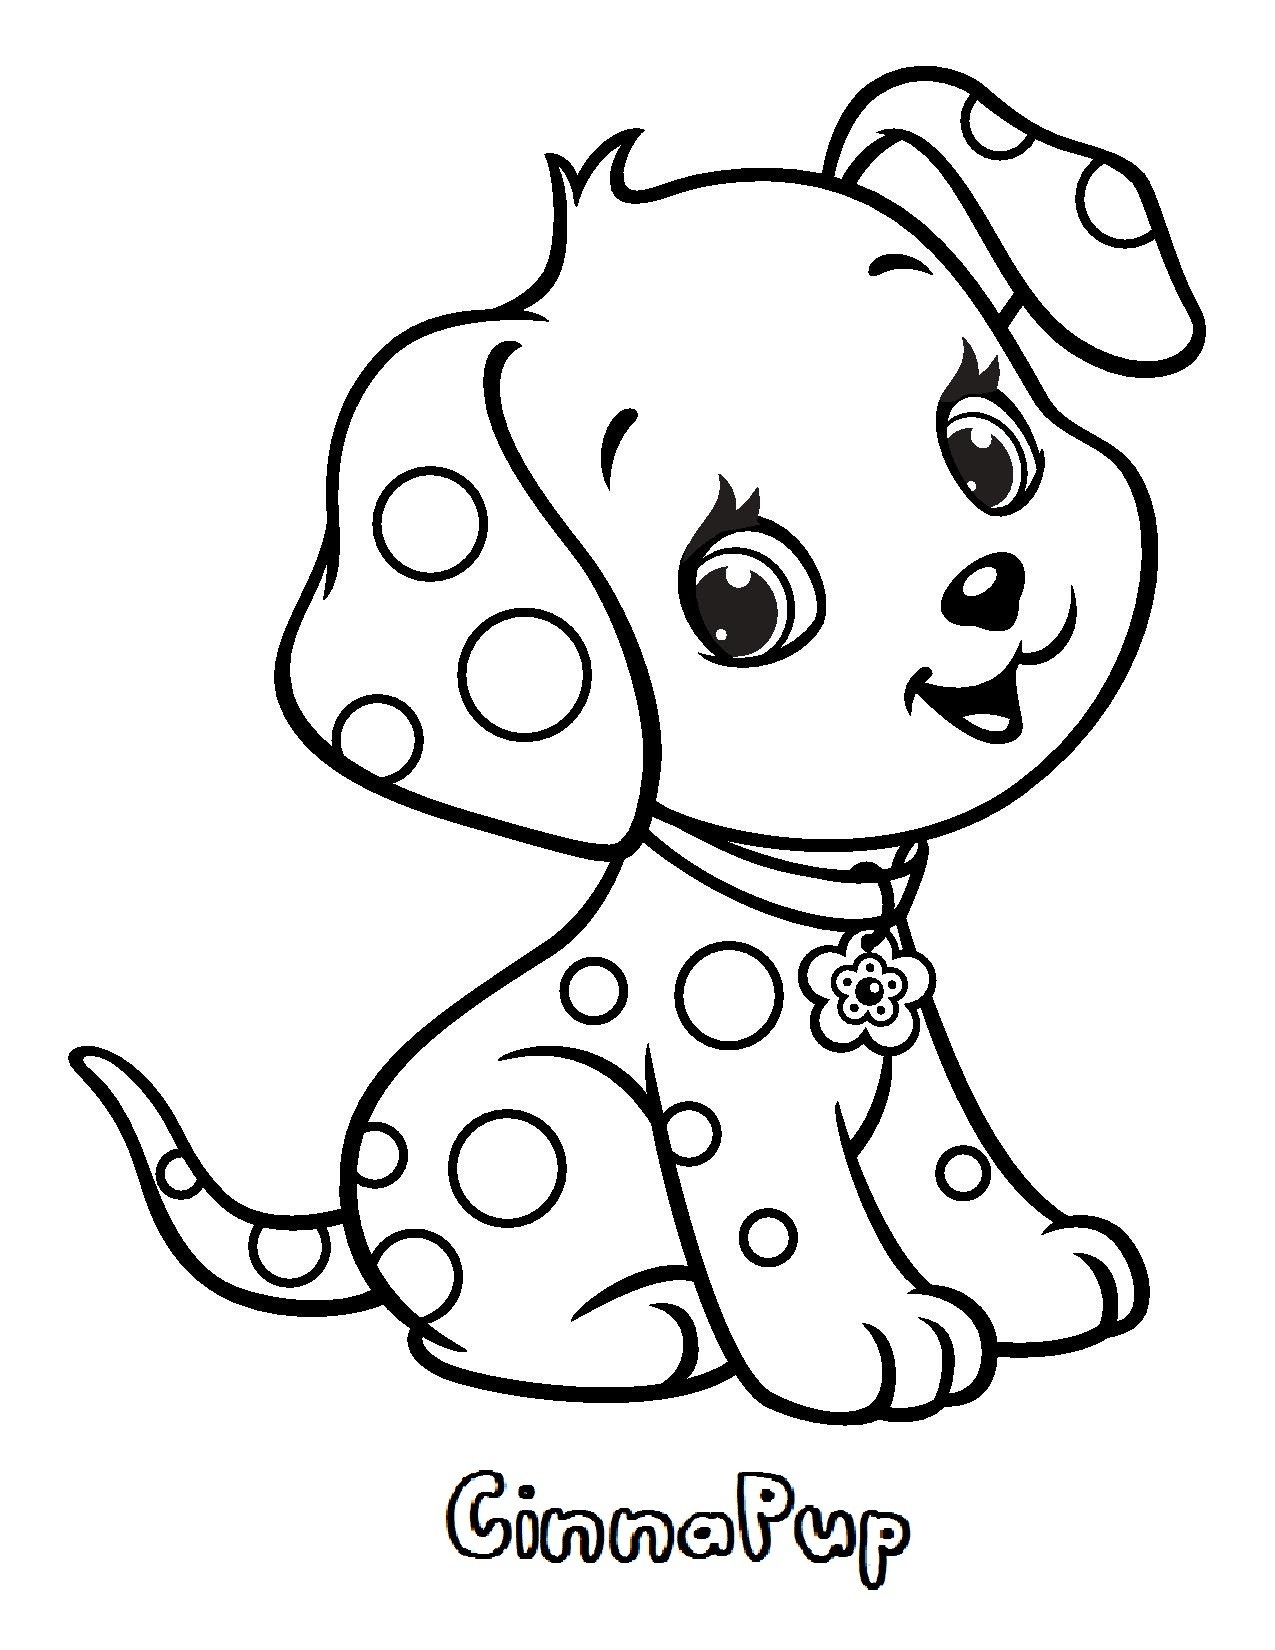 Cinna Puppy Coloring Page   Free Printable Coloring Pages for Kids